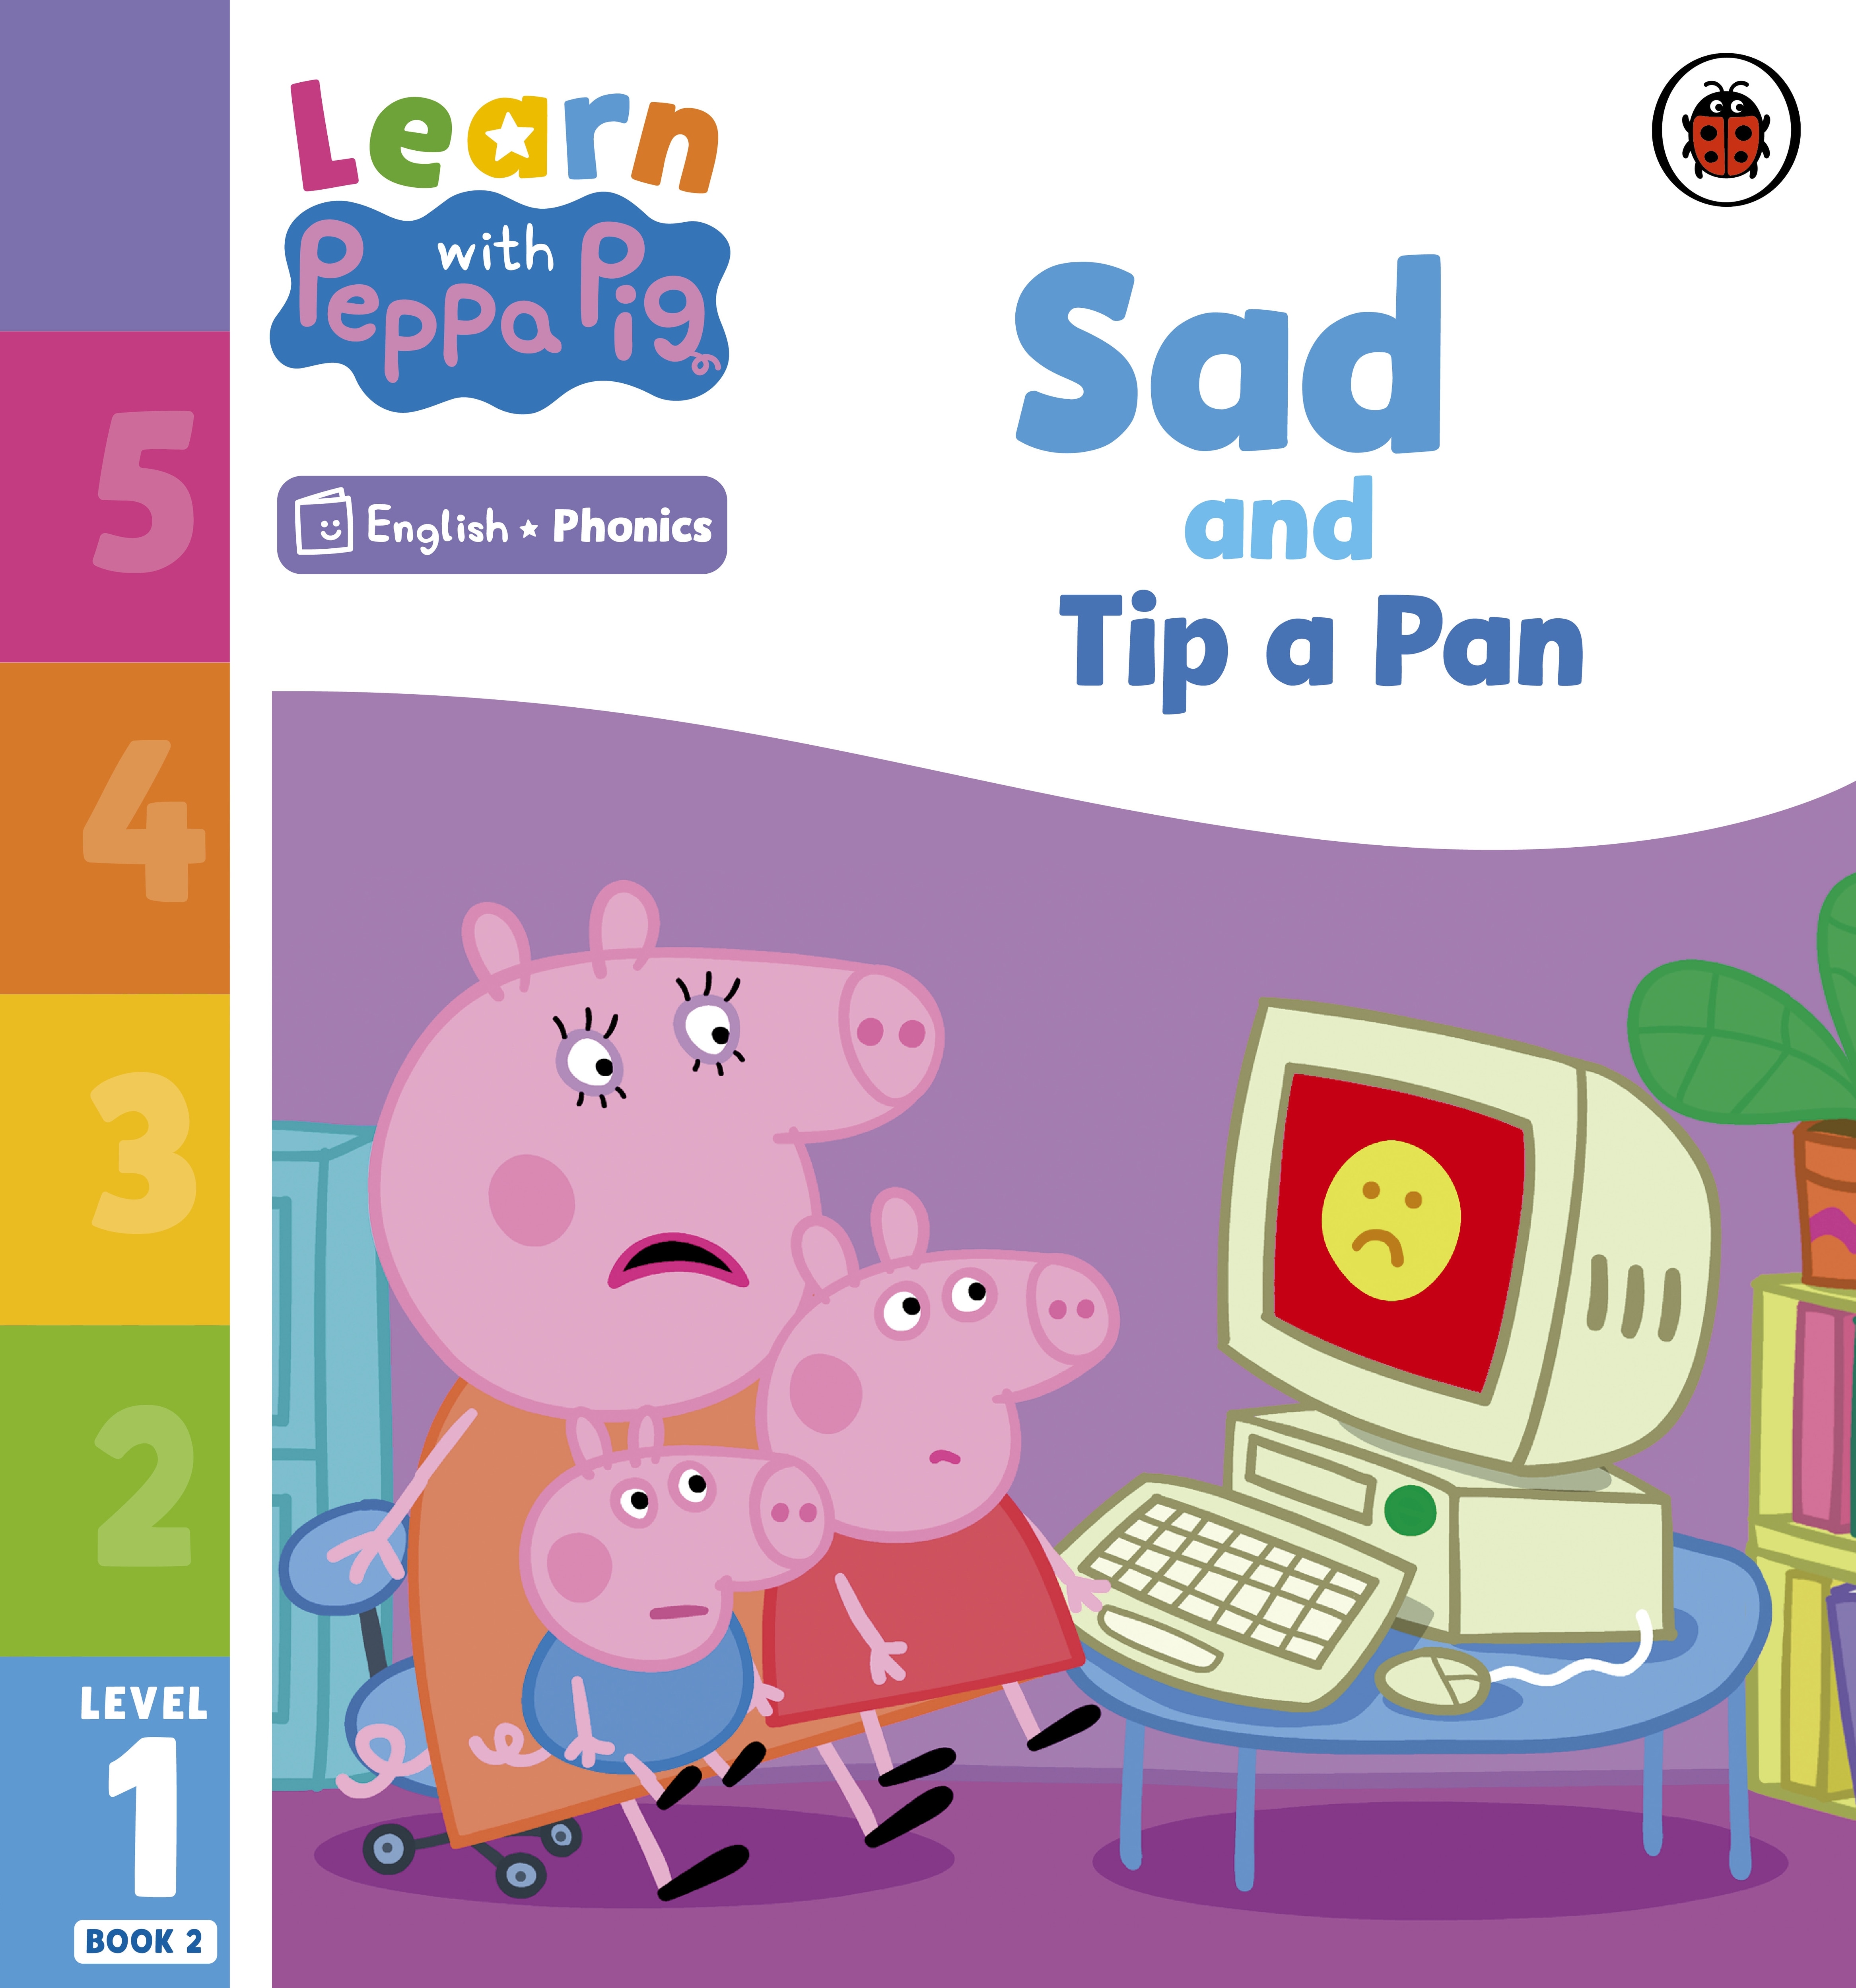 Learn with Peppa Phonics Level 1 Book 2 — Sad and Tip a Pan (Phonics Reader)